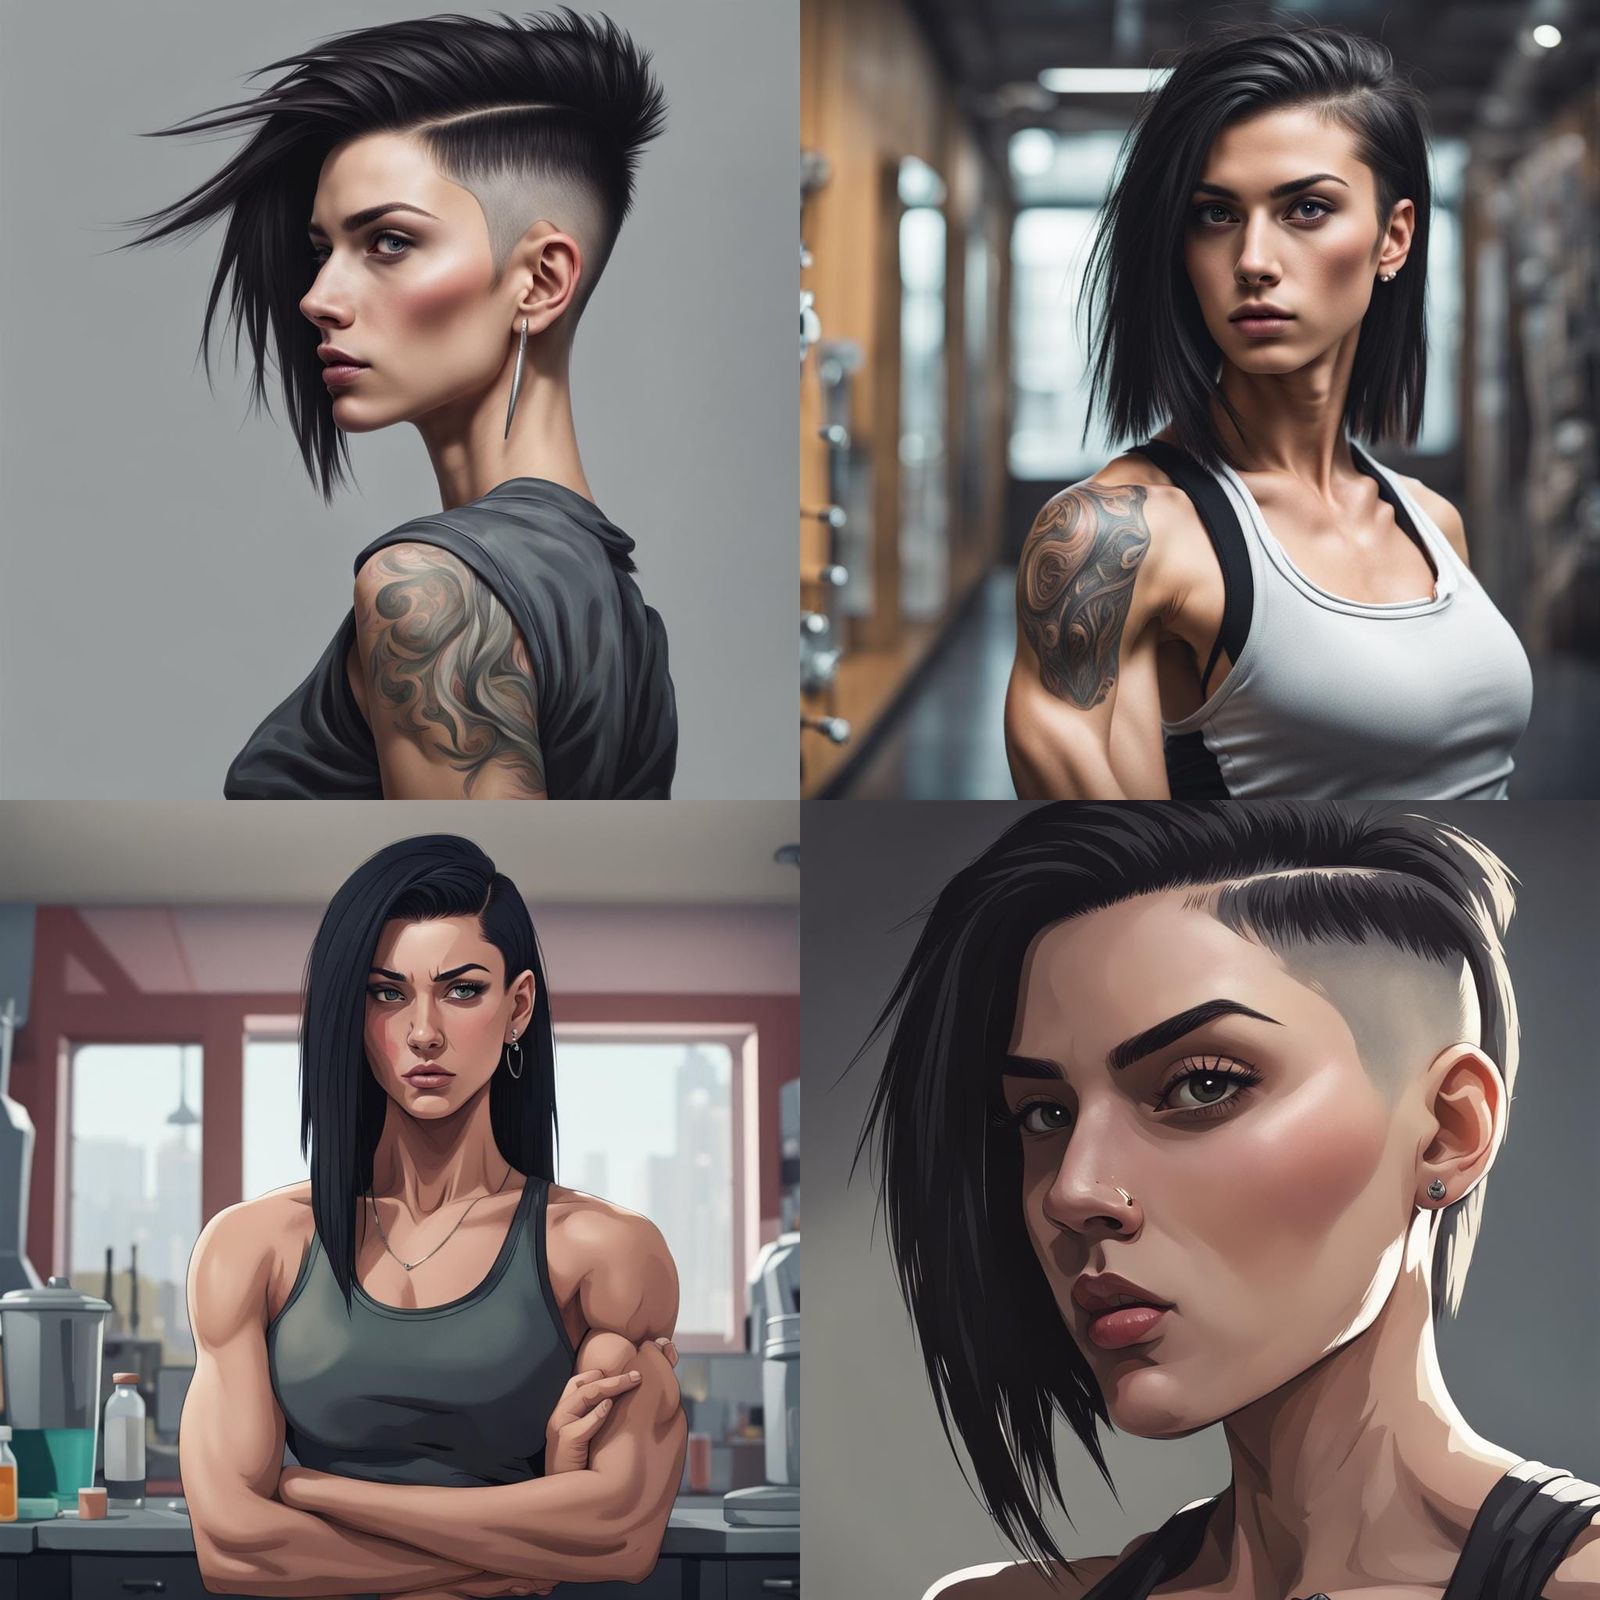 girl with undercut hairstyle, dark hair and muscles and long nose is high on drug